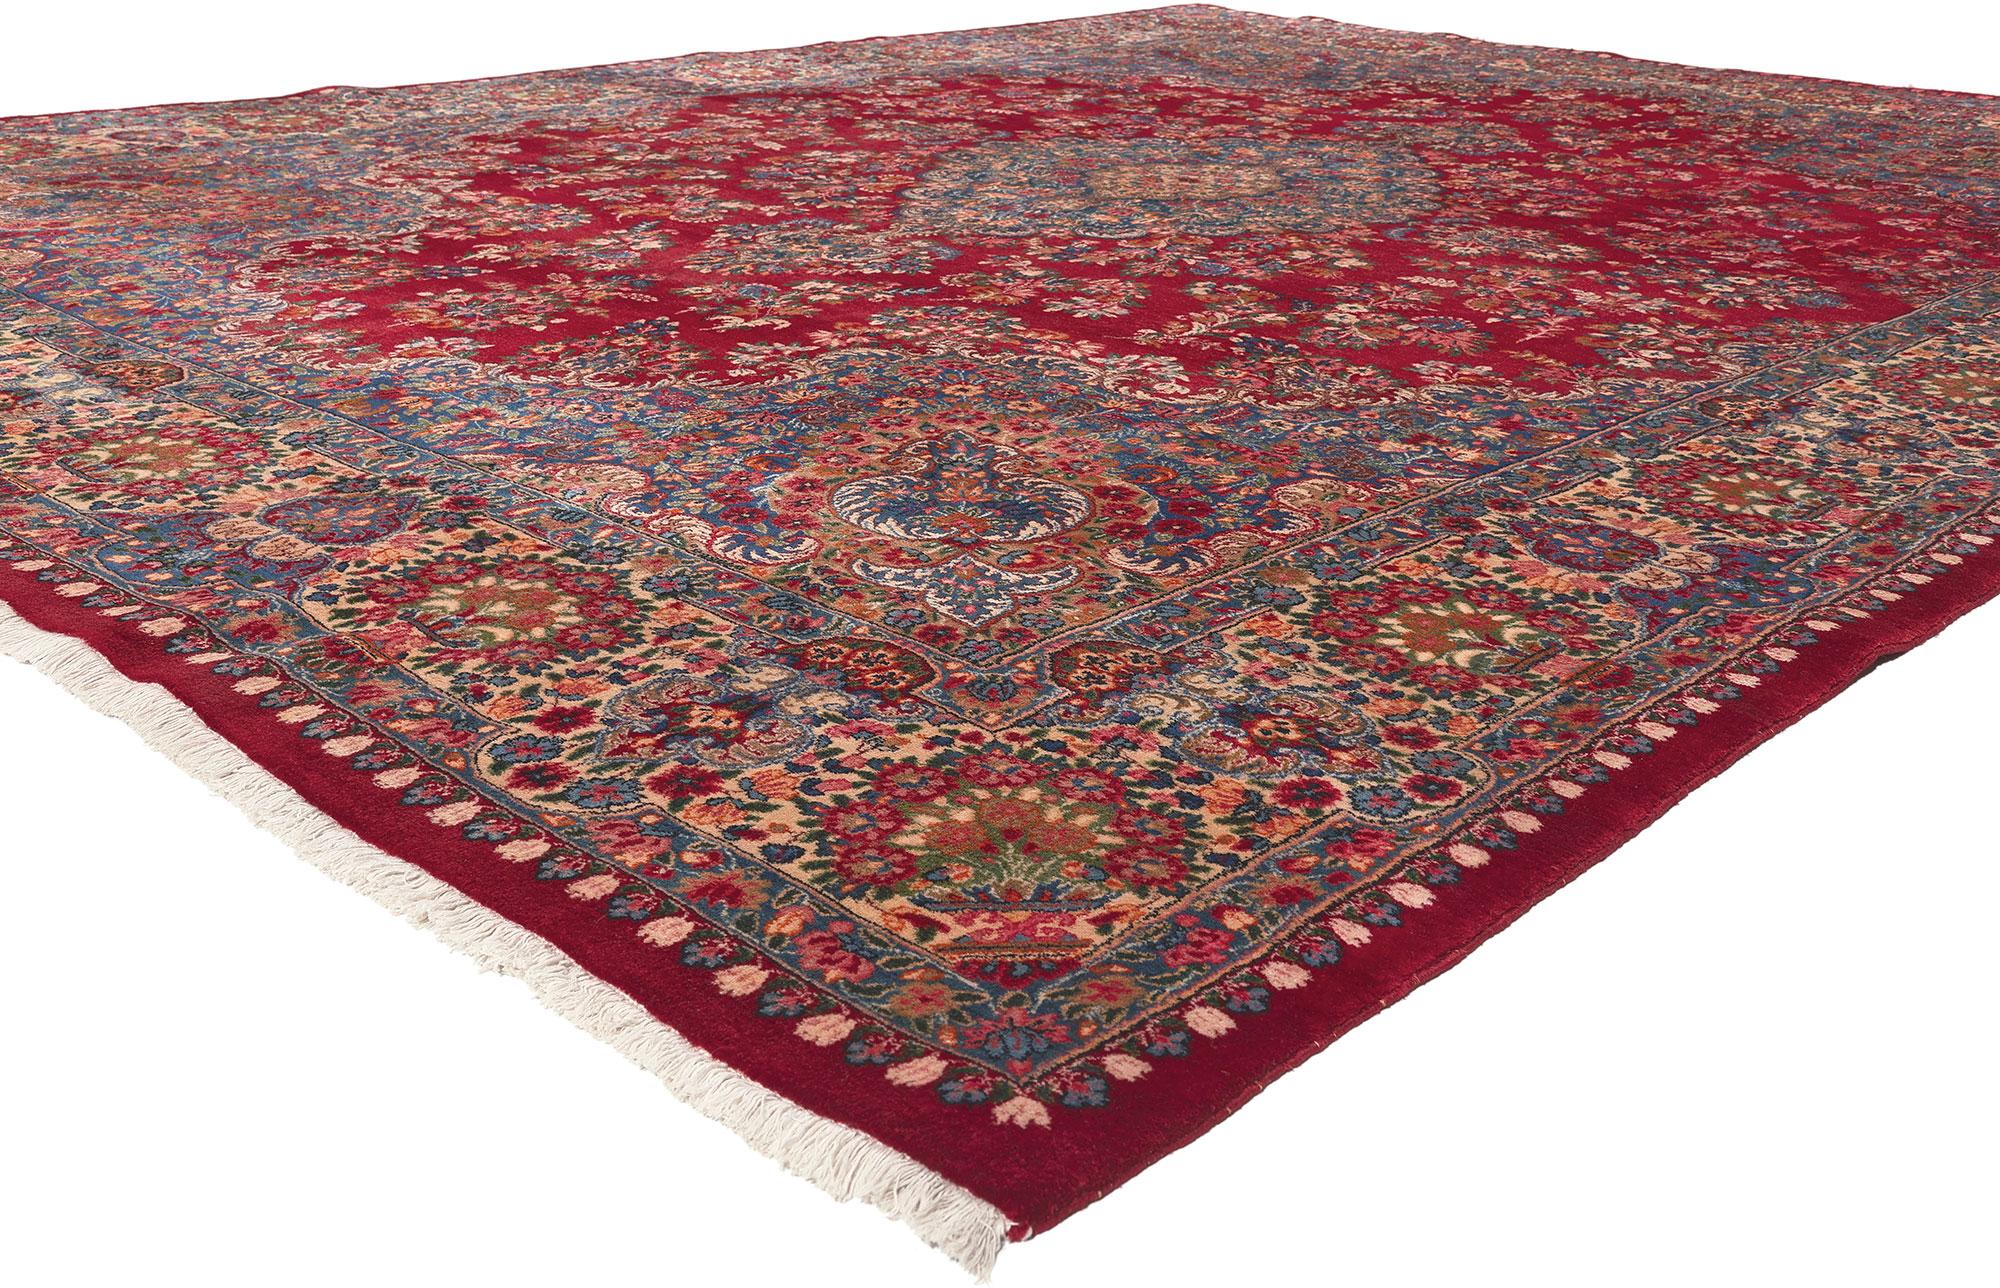 77718 Vintage Persian Kerman Rug, 10'00 x 12'10.
Classic elegance meets regal charm in this vintage Persian Kerman  rug. The intricate floral design and sophisticated color palette woven into this piece work together creating a look of stately